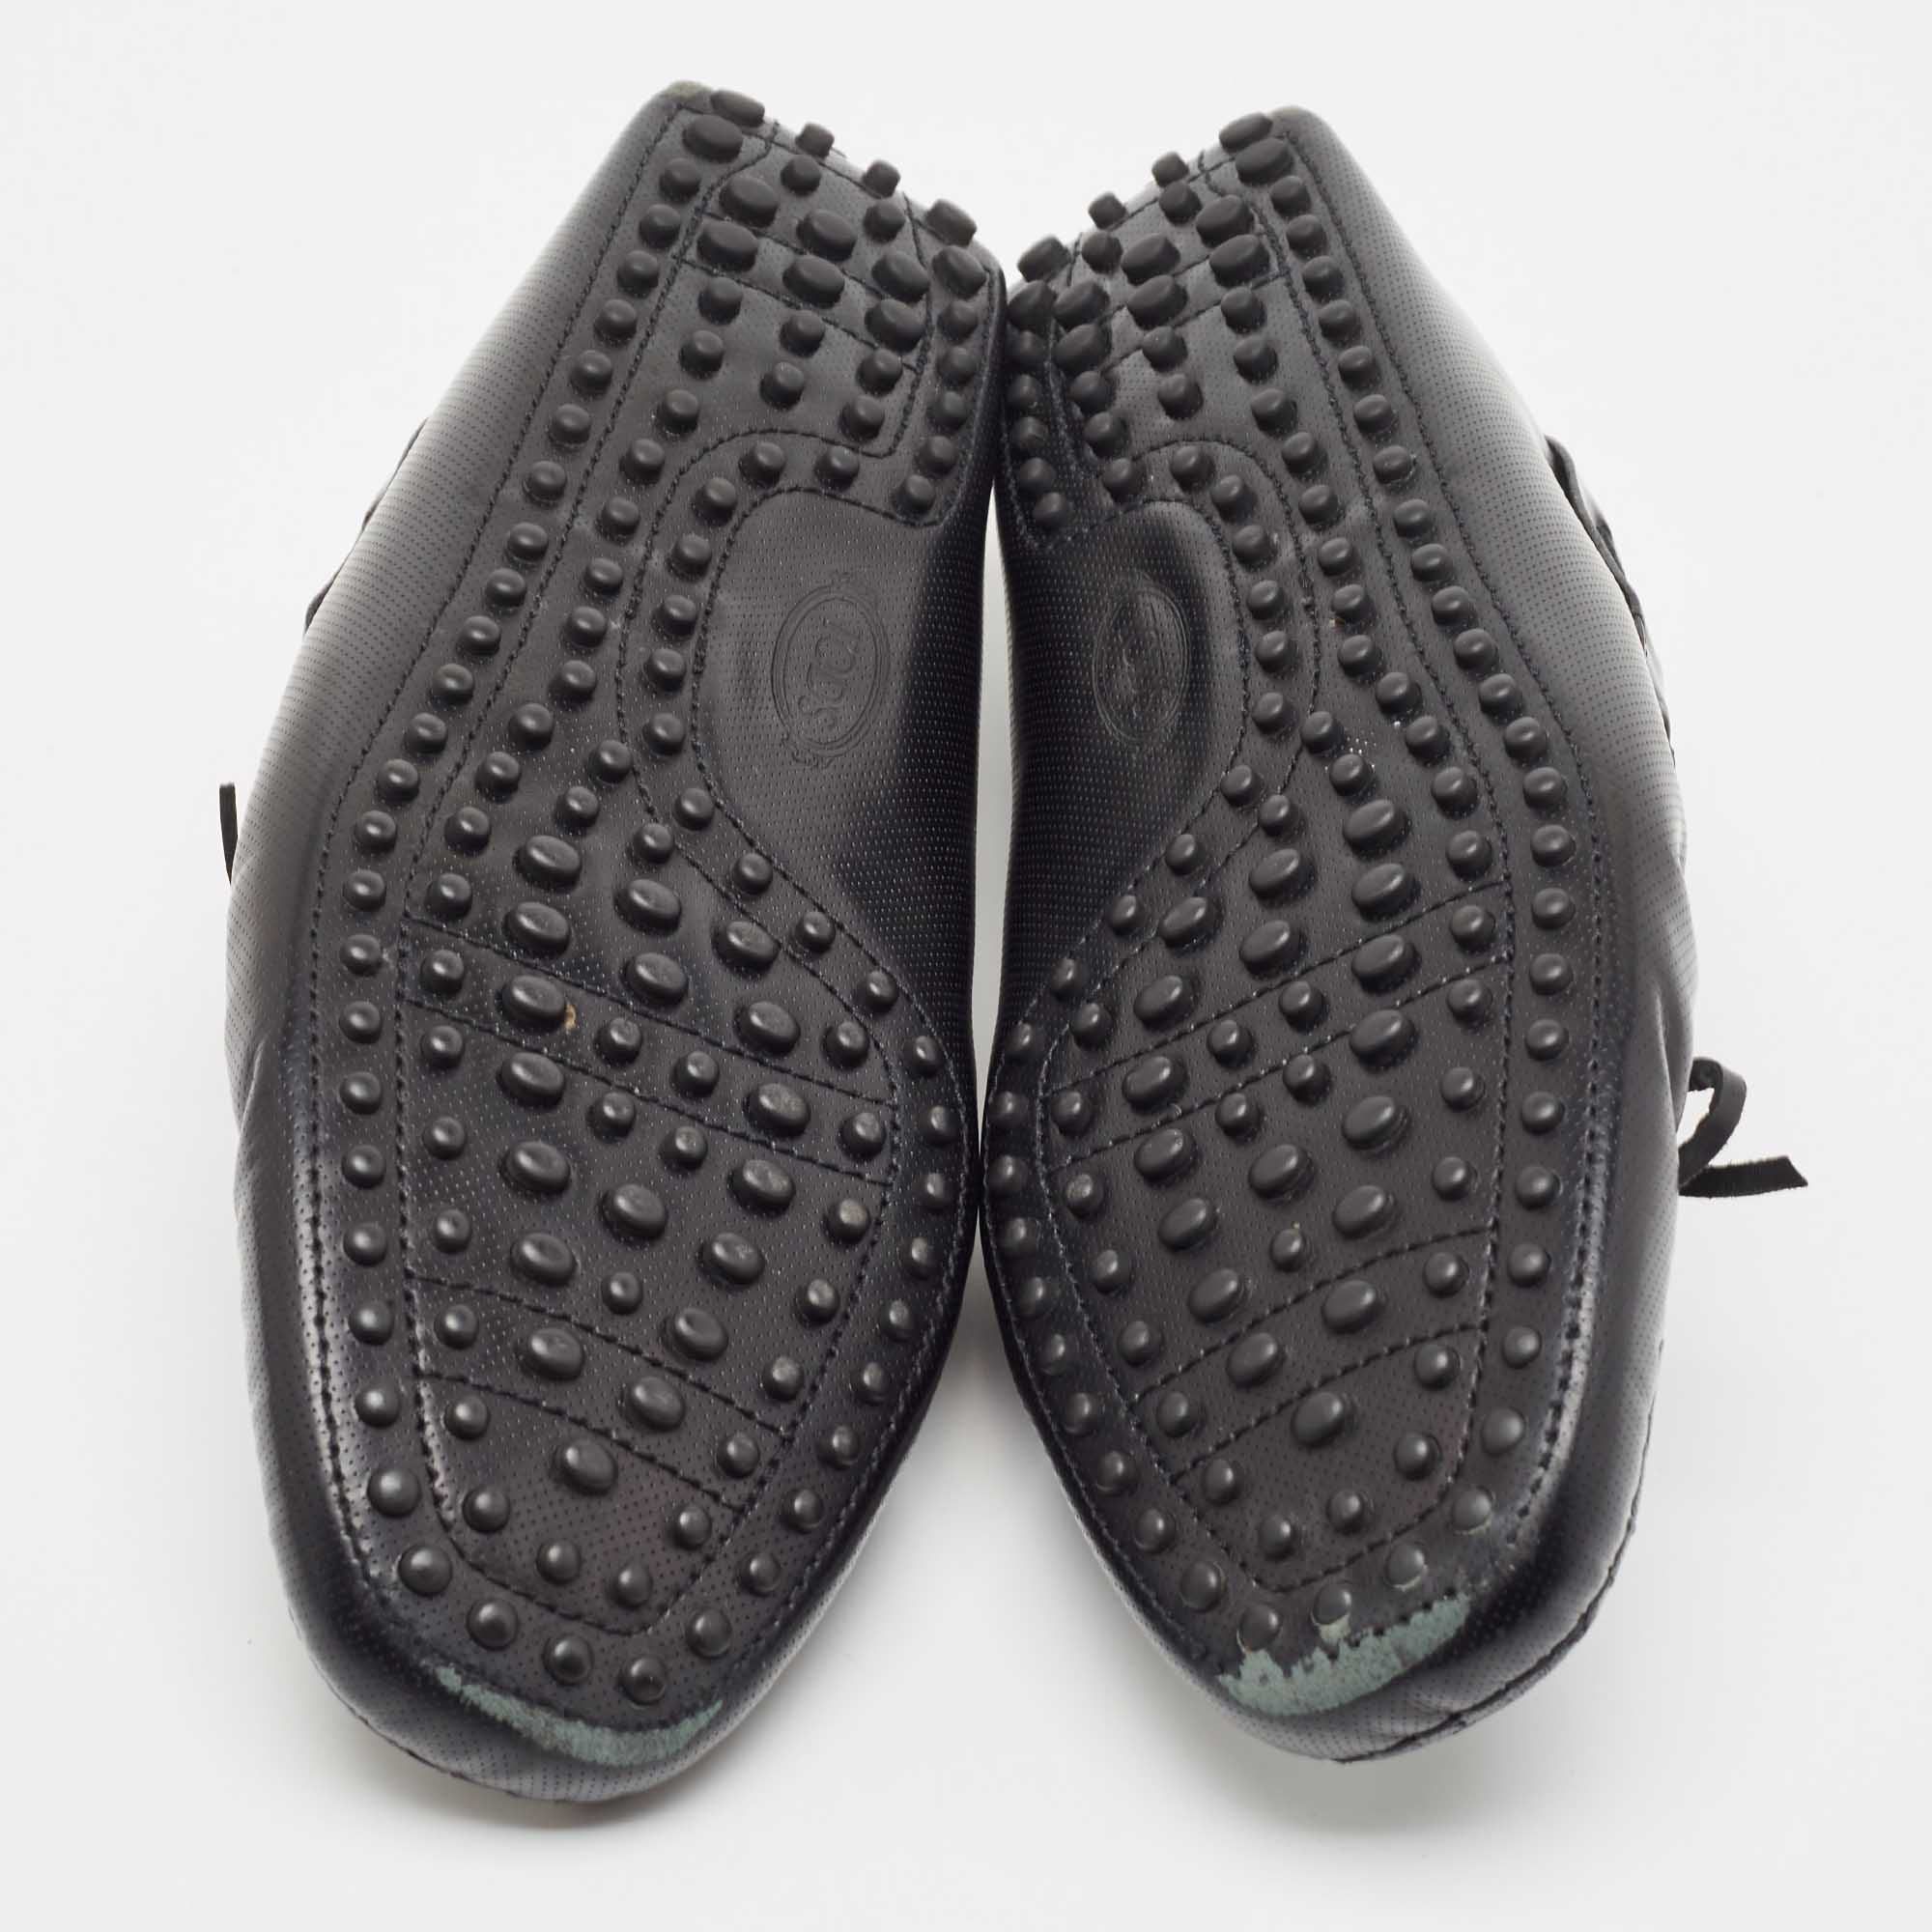 Tod's Black Perforated Leather Bow Loafers Size 43